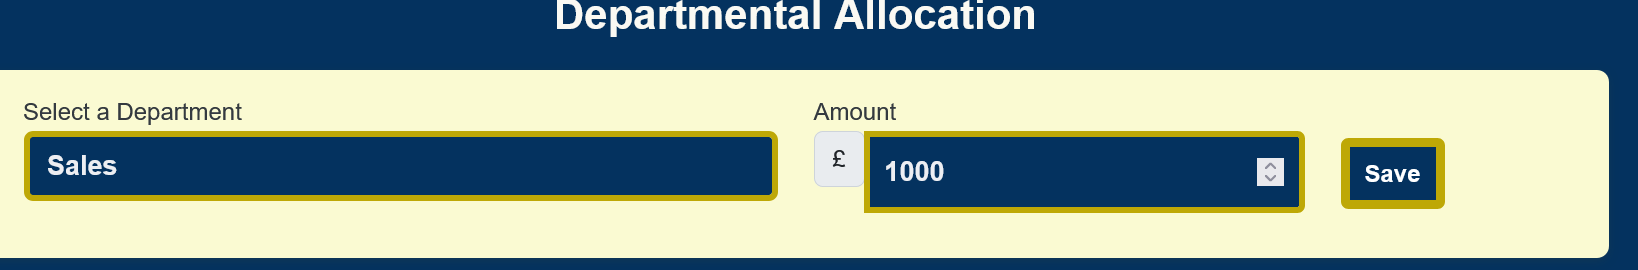 user would select a department from the dropdown and allocate amount from the initial budget.png